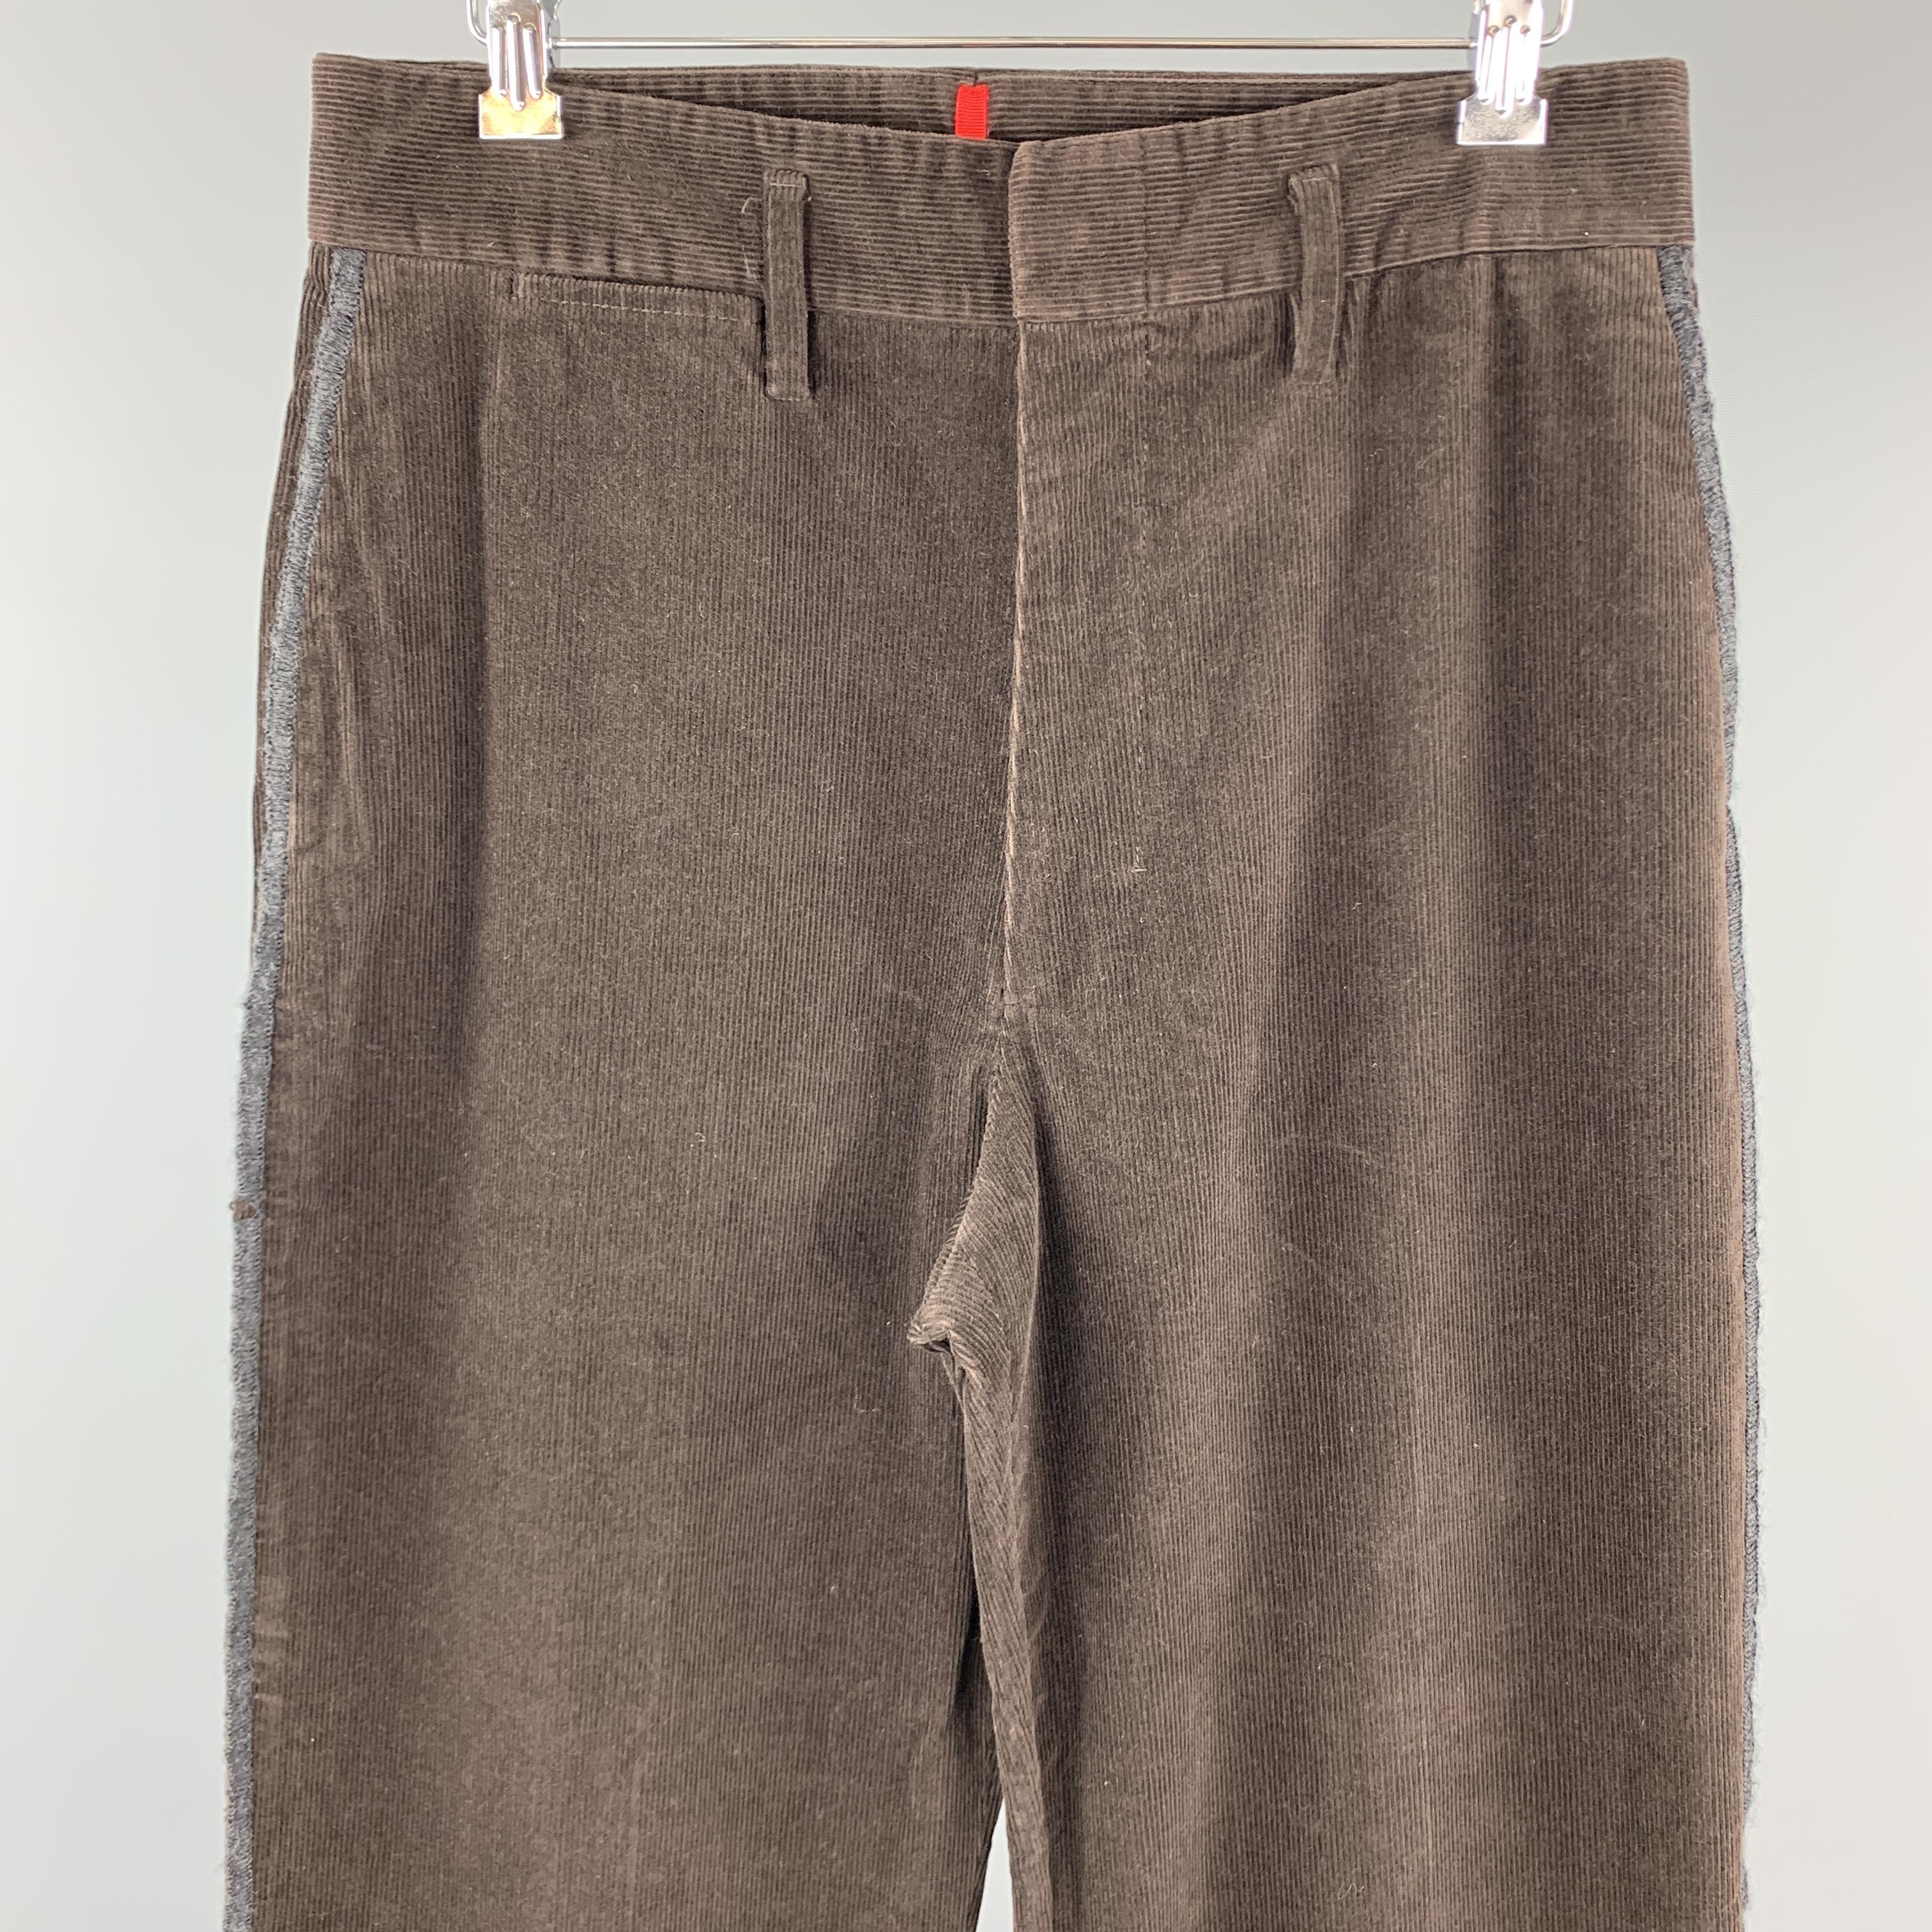 PRADA trousers come in dark brown corduroy with a high rise, hidden placket waistband, and side stripe. Made in Italy.

Good Pre-Owned Condition.
Marked: IT 48

Measurements:

Waist: 31 in.
Rise: 13 in.
Inseam: 28 in.